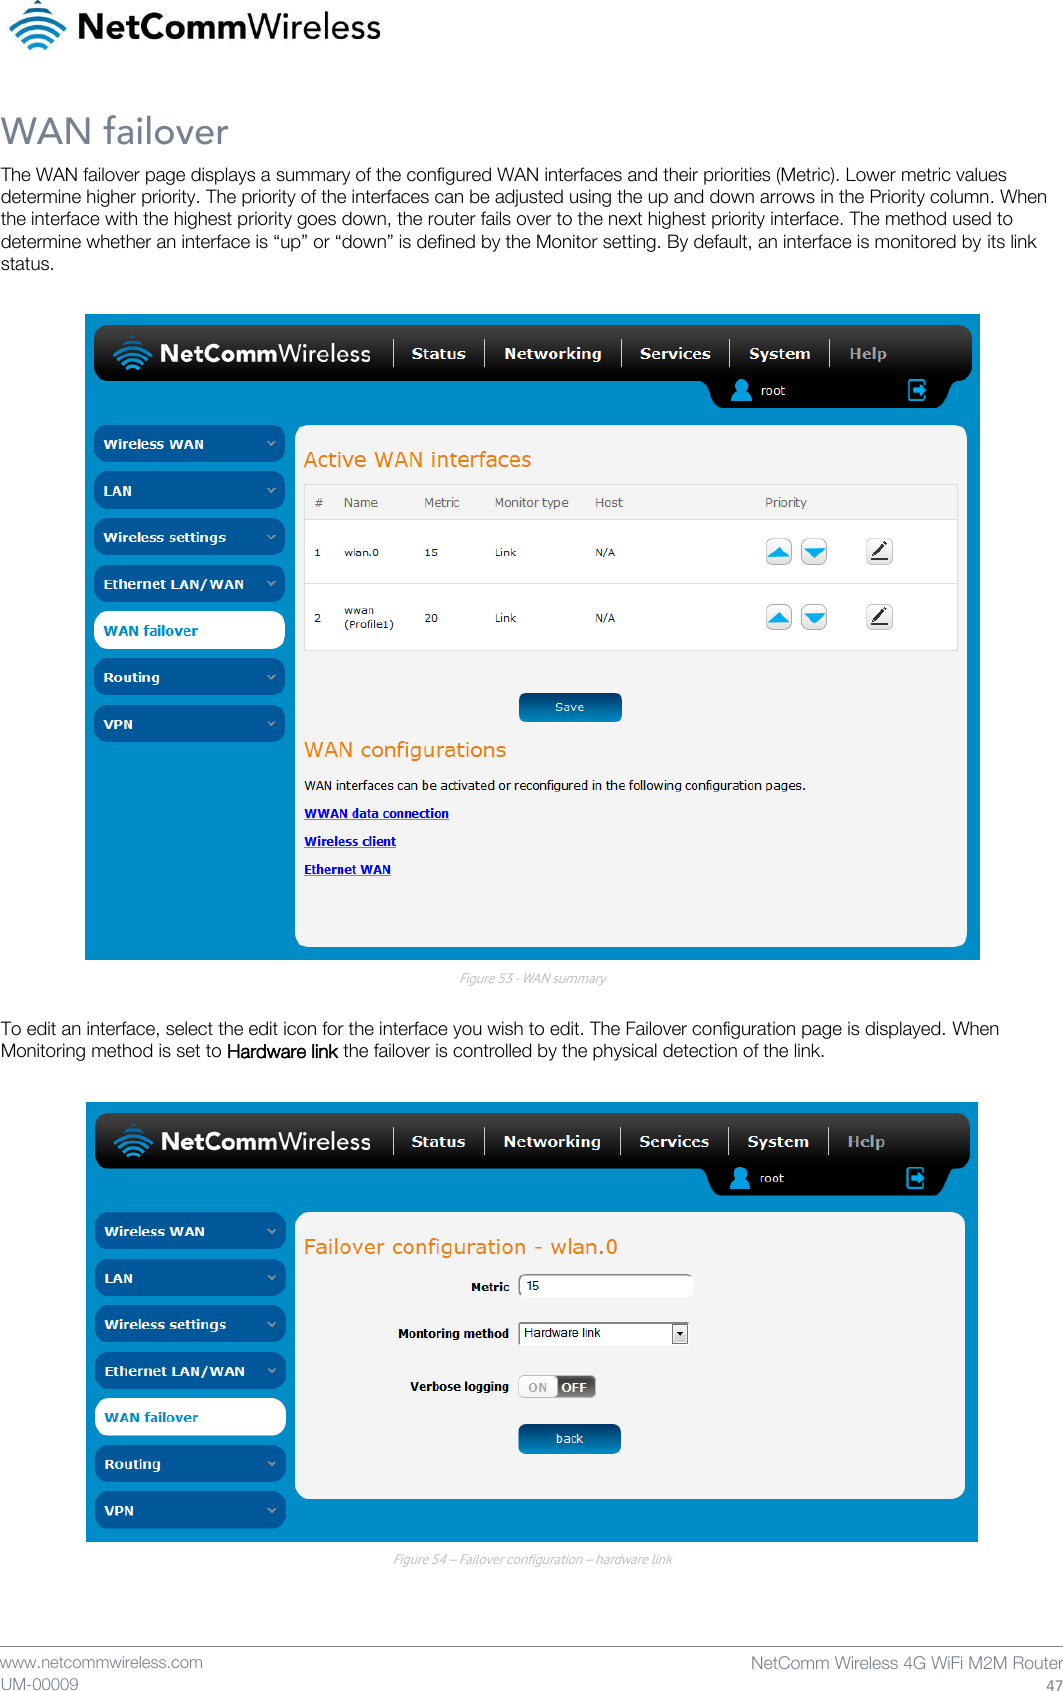    www.netcommwireless.com NetComm Wireless 4G WiFi M2M Router 47 UM-00009 WAN failover The WAN failover page displays a summary of the configured WAN interfaces and their priorities (Metric). Lower metric values determine higher priority. The priority of the interfaces can be adjusted using the up and down arrows in the Priority column. When the interface with the highest priority goes down, the router fails over to the next highest priority interface. The method used to determine whether an interface is “up” or “down” is defined by the Monitor setting. By default, an interface is monitored by its link status.   Figure 53 - WAN summary  To edit an interface, select the edit icon for the interface you wish to edit. The Failover configuration page is displayed. When Monitoring method is set to Hardware link the failover is controlled by the physical detection of the link.   Figure 54 – Failover configuration – hardware link    